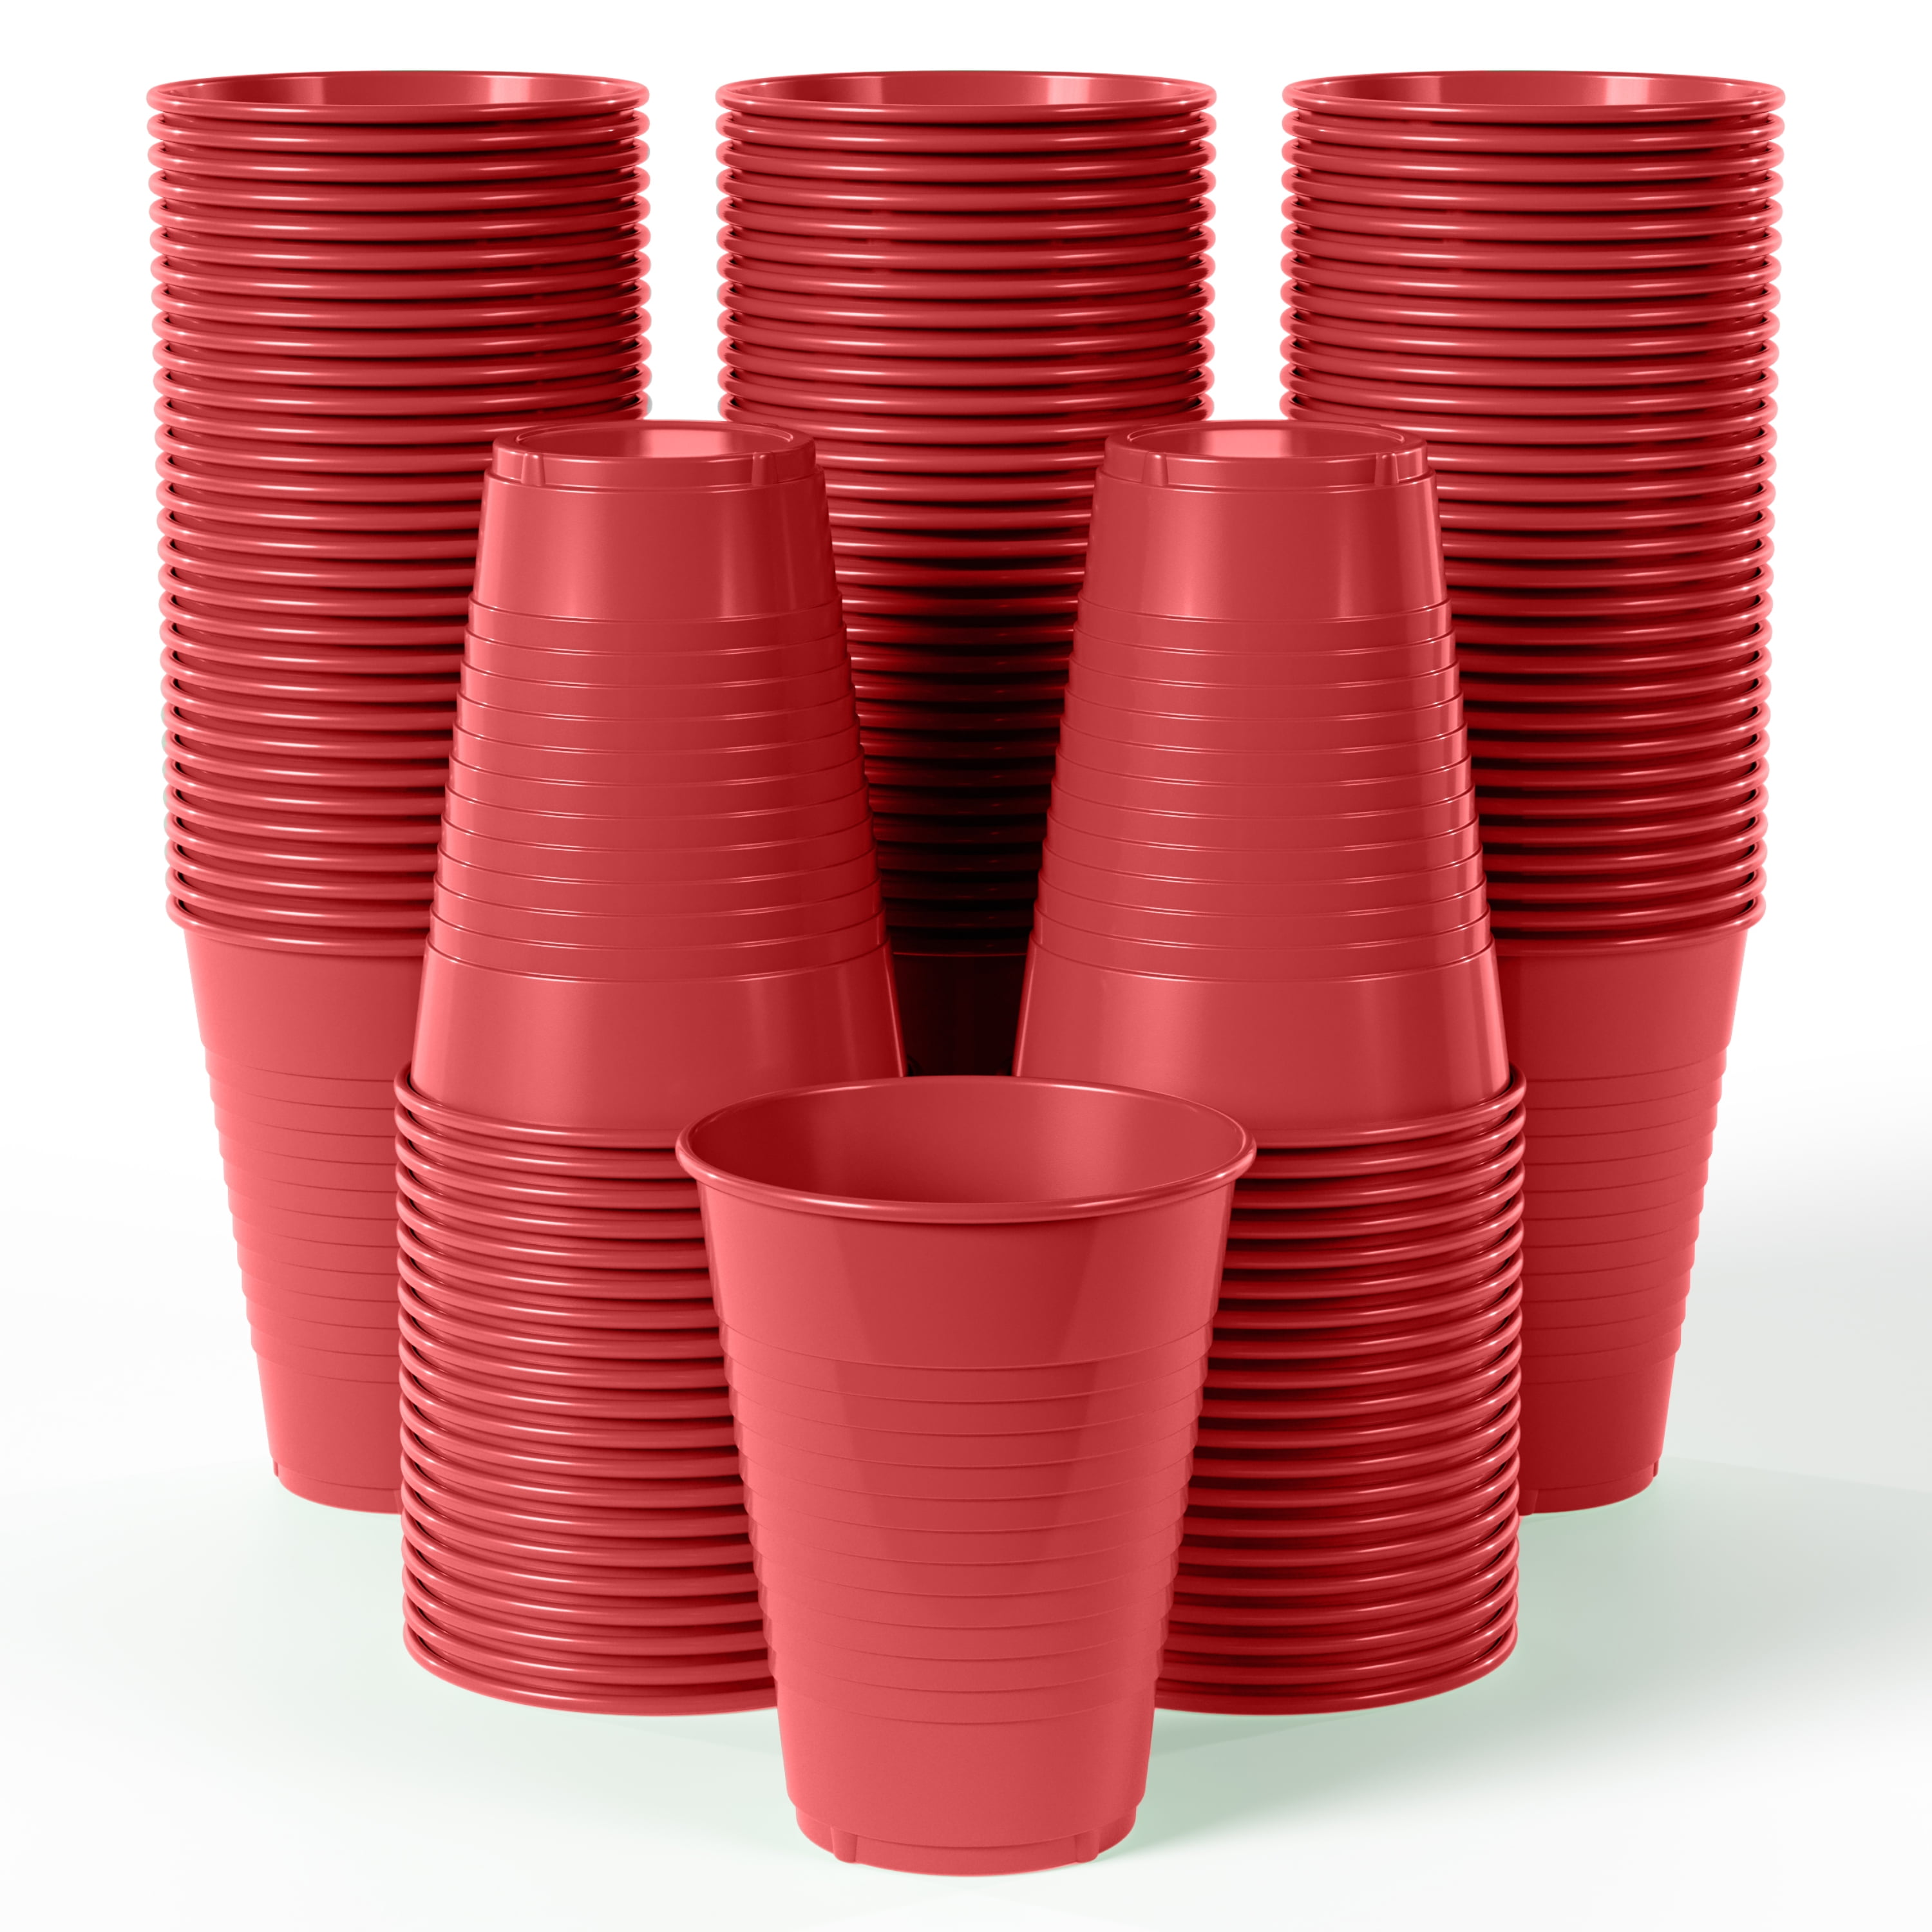 [400 Pack] 16 oz Red Plastic Cups - Red Disposable Plastic Party Cups Crack Resistant - Great for Beer Pong, Tailgate, Birthday Parties, Gatherings